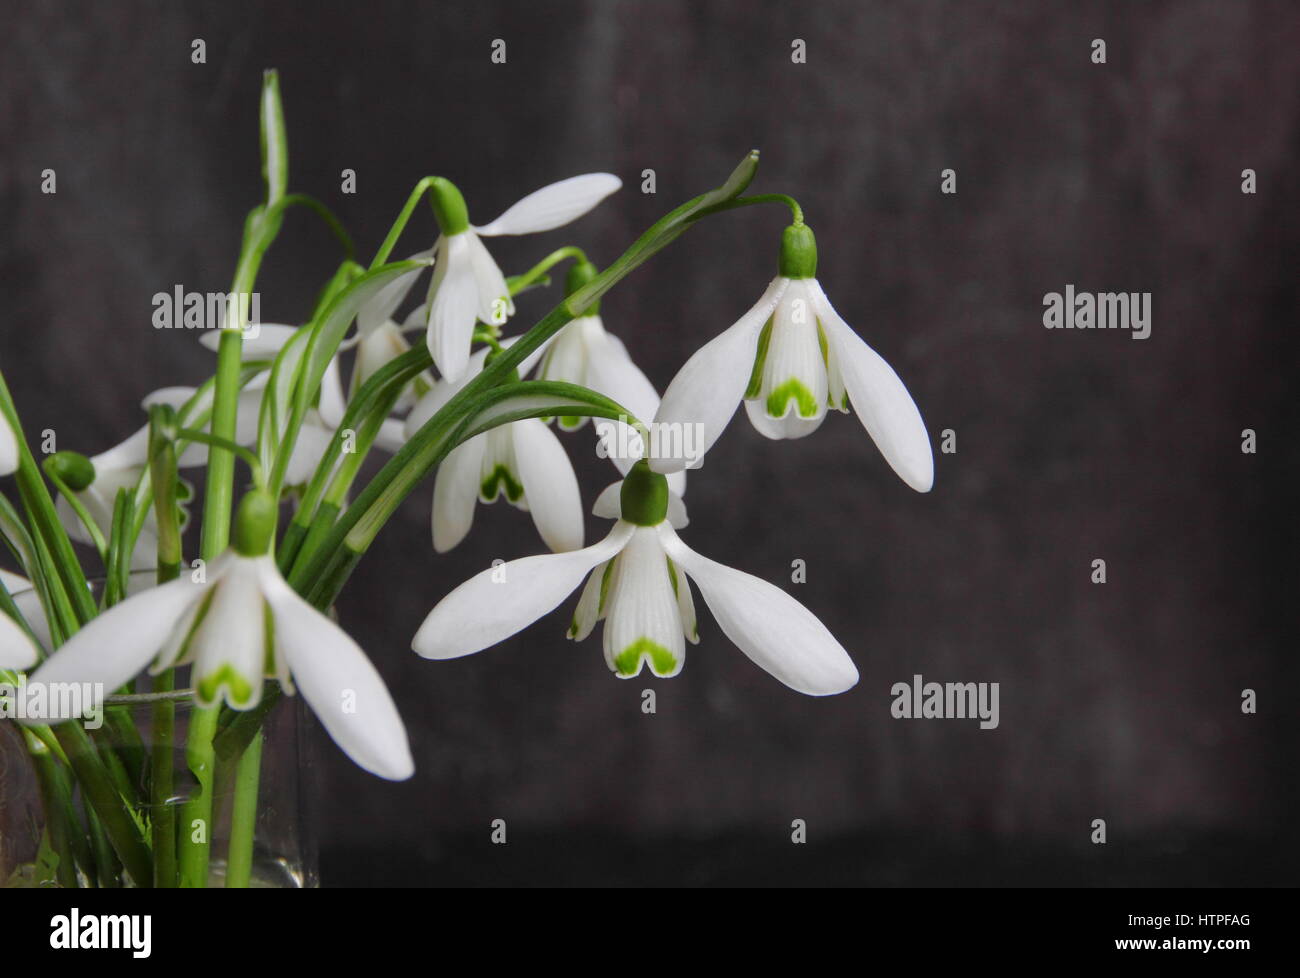 A bunch of freshly picked single flower snowdrops (galanthus) in a glass vase against slate background, late February, UK Stock Photo